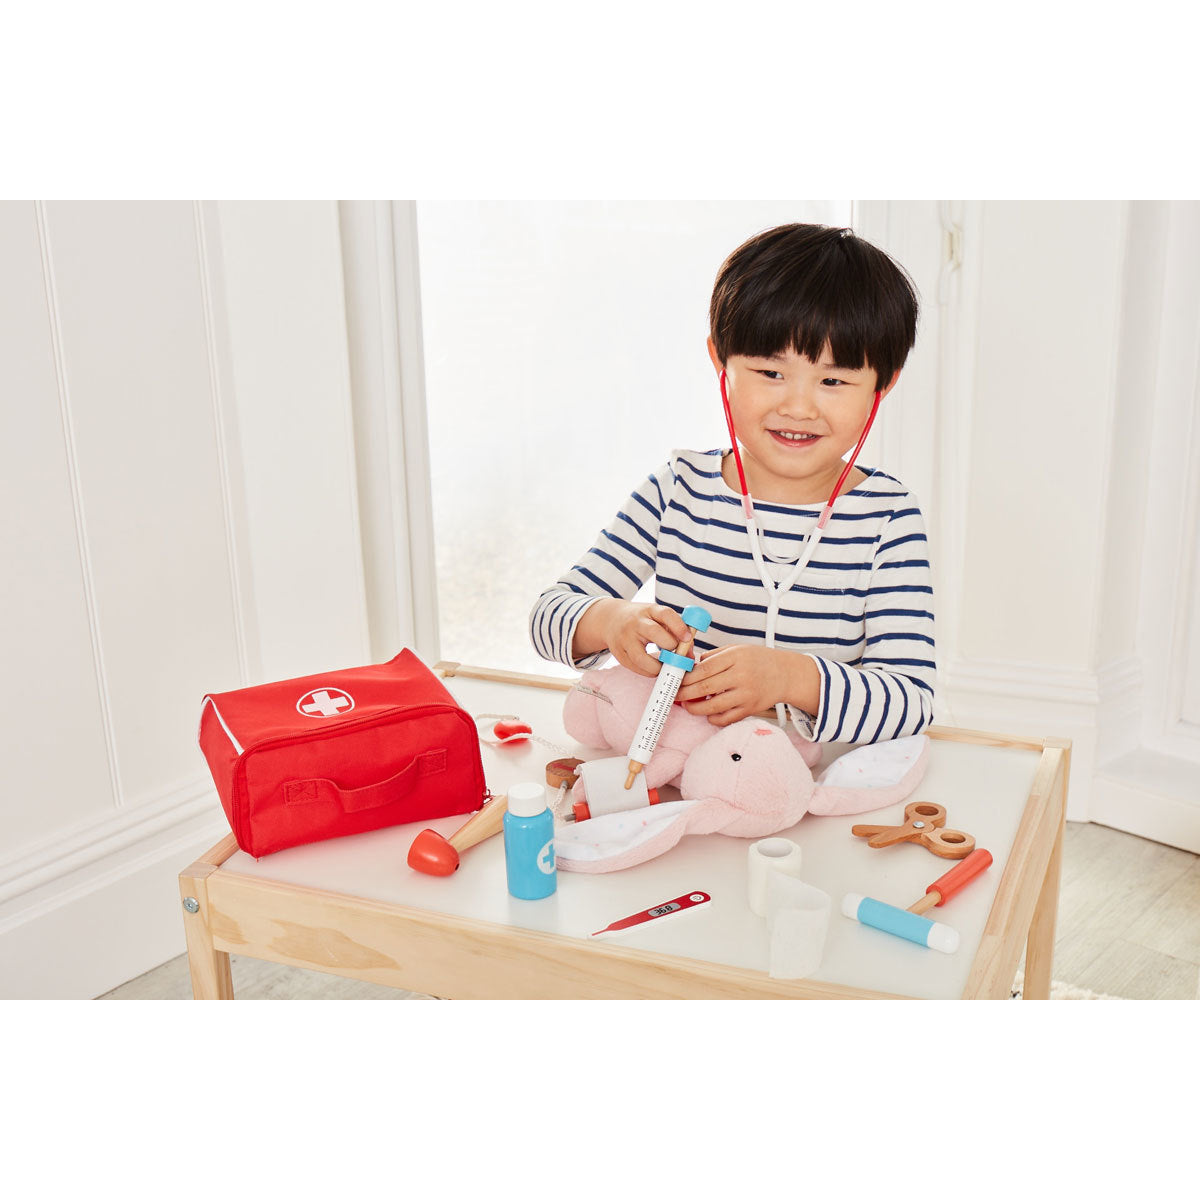 Early Learning Centre My Little Medical Case Playset